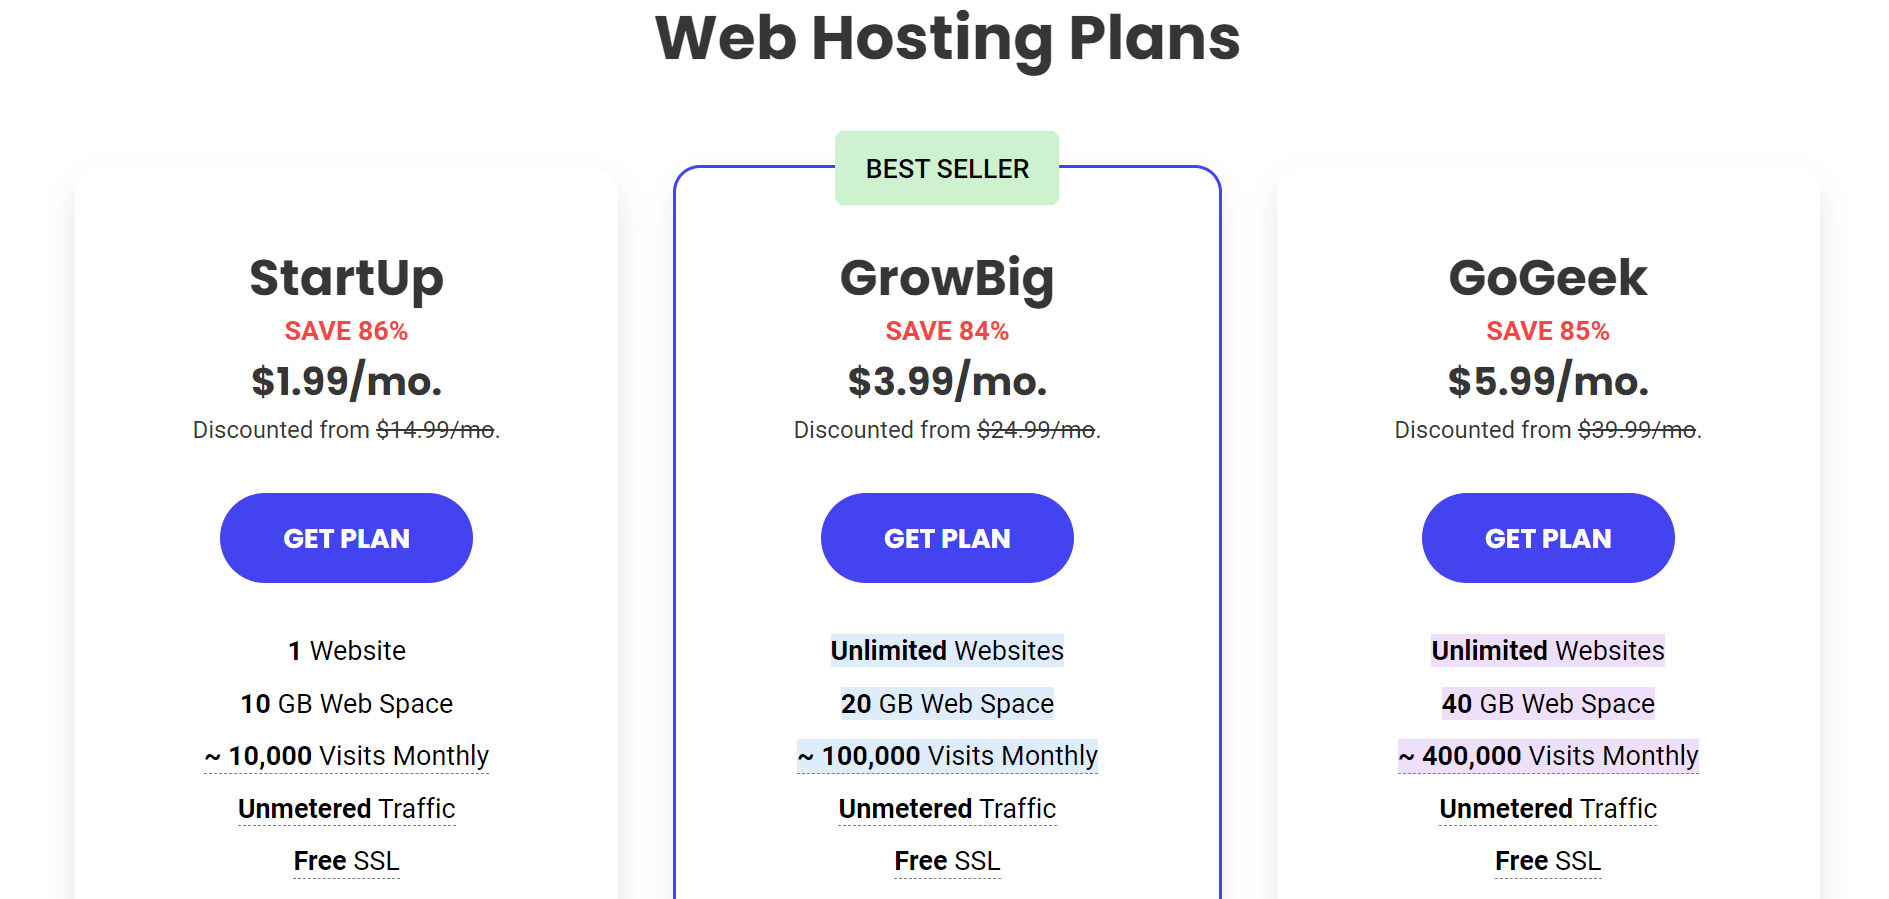 Summary of the three shared hosting plans offered by SiteGround